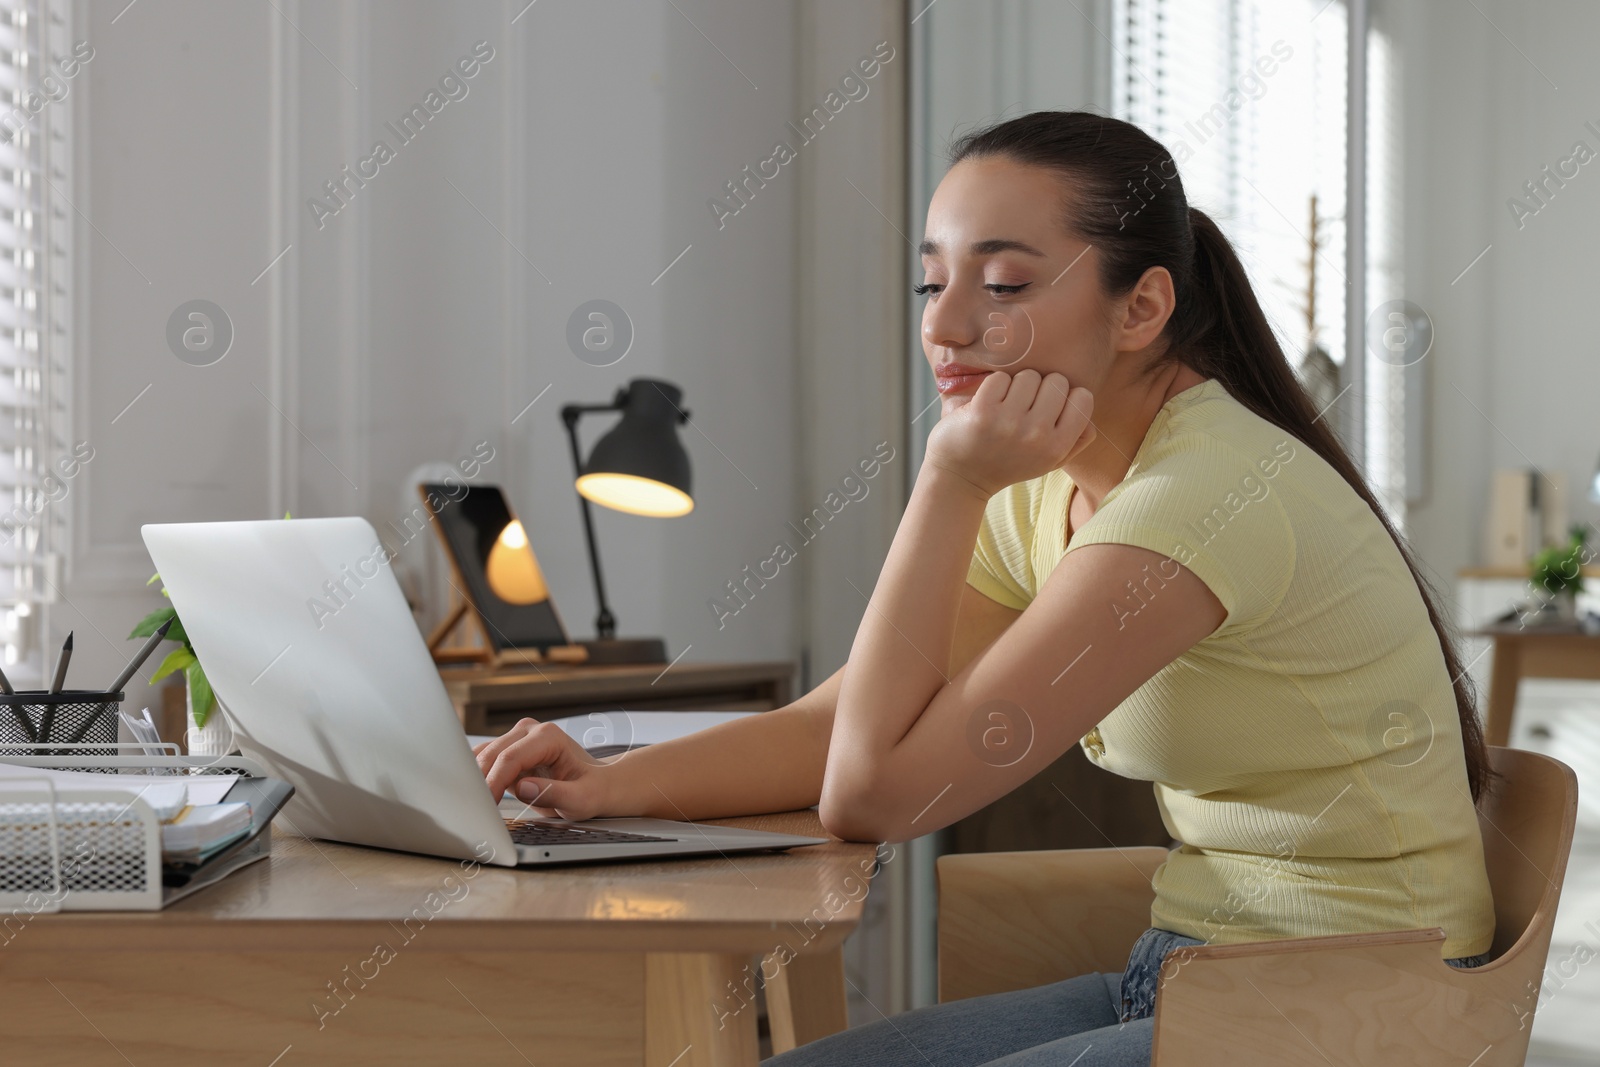 Photo of Young woman with poor posture using laptop at table indoors